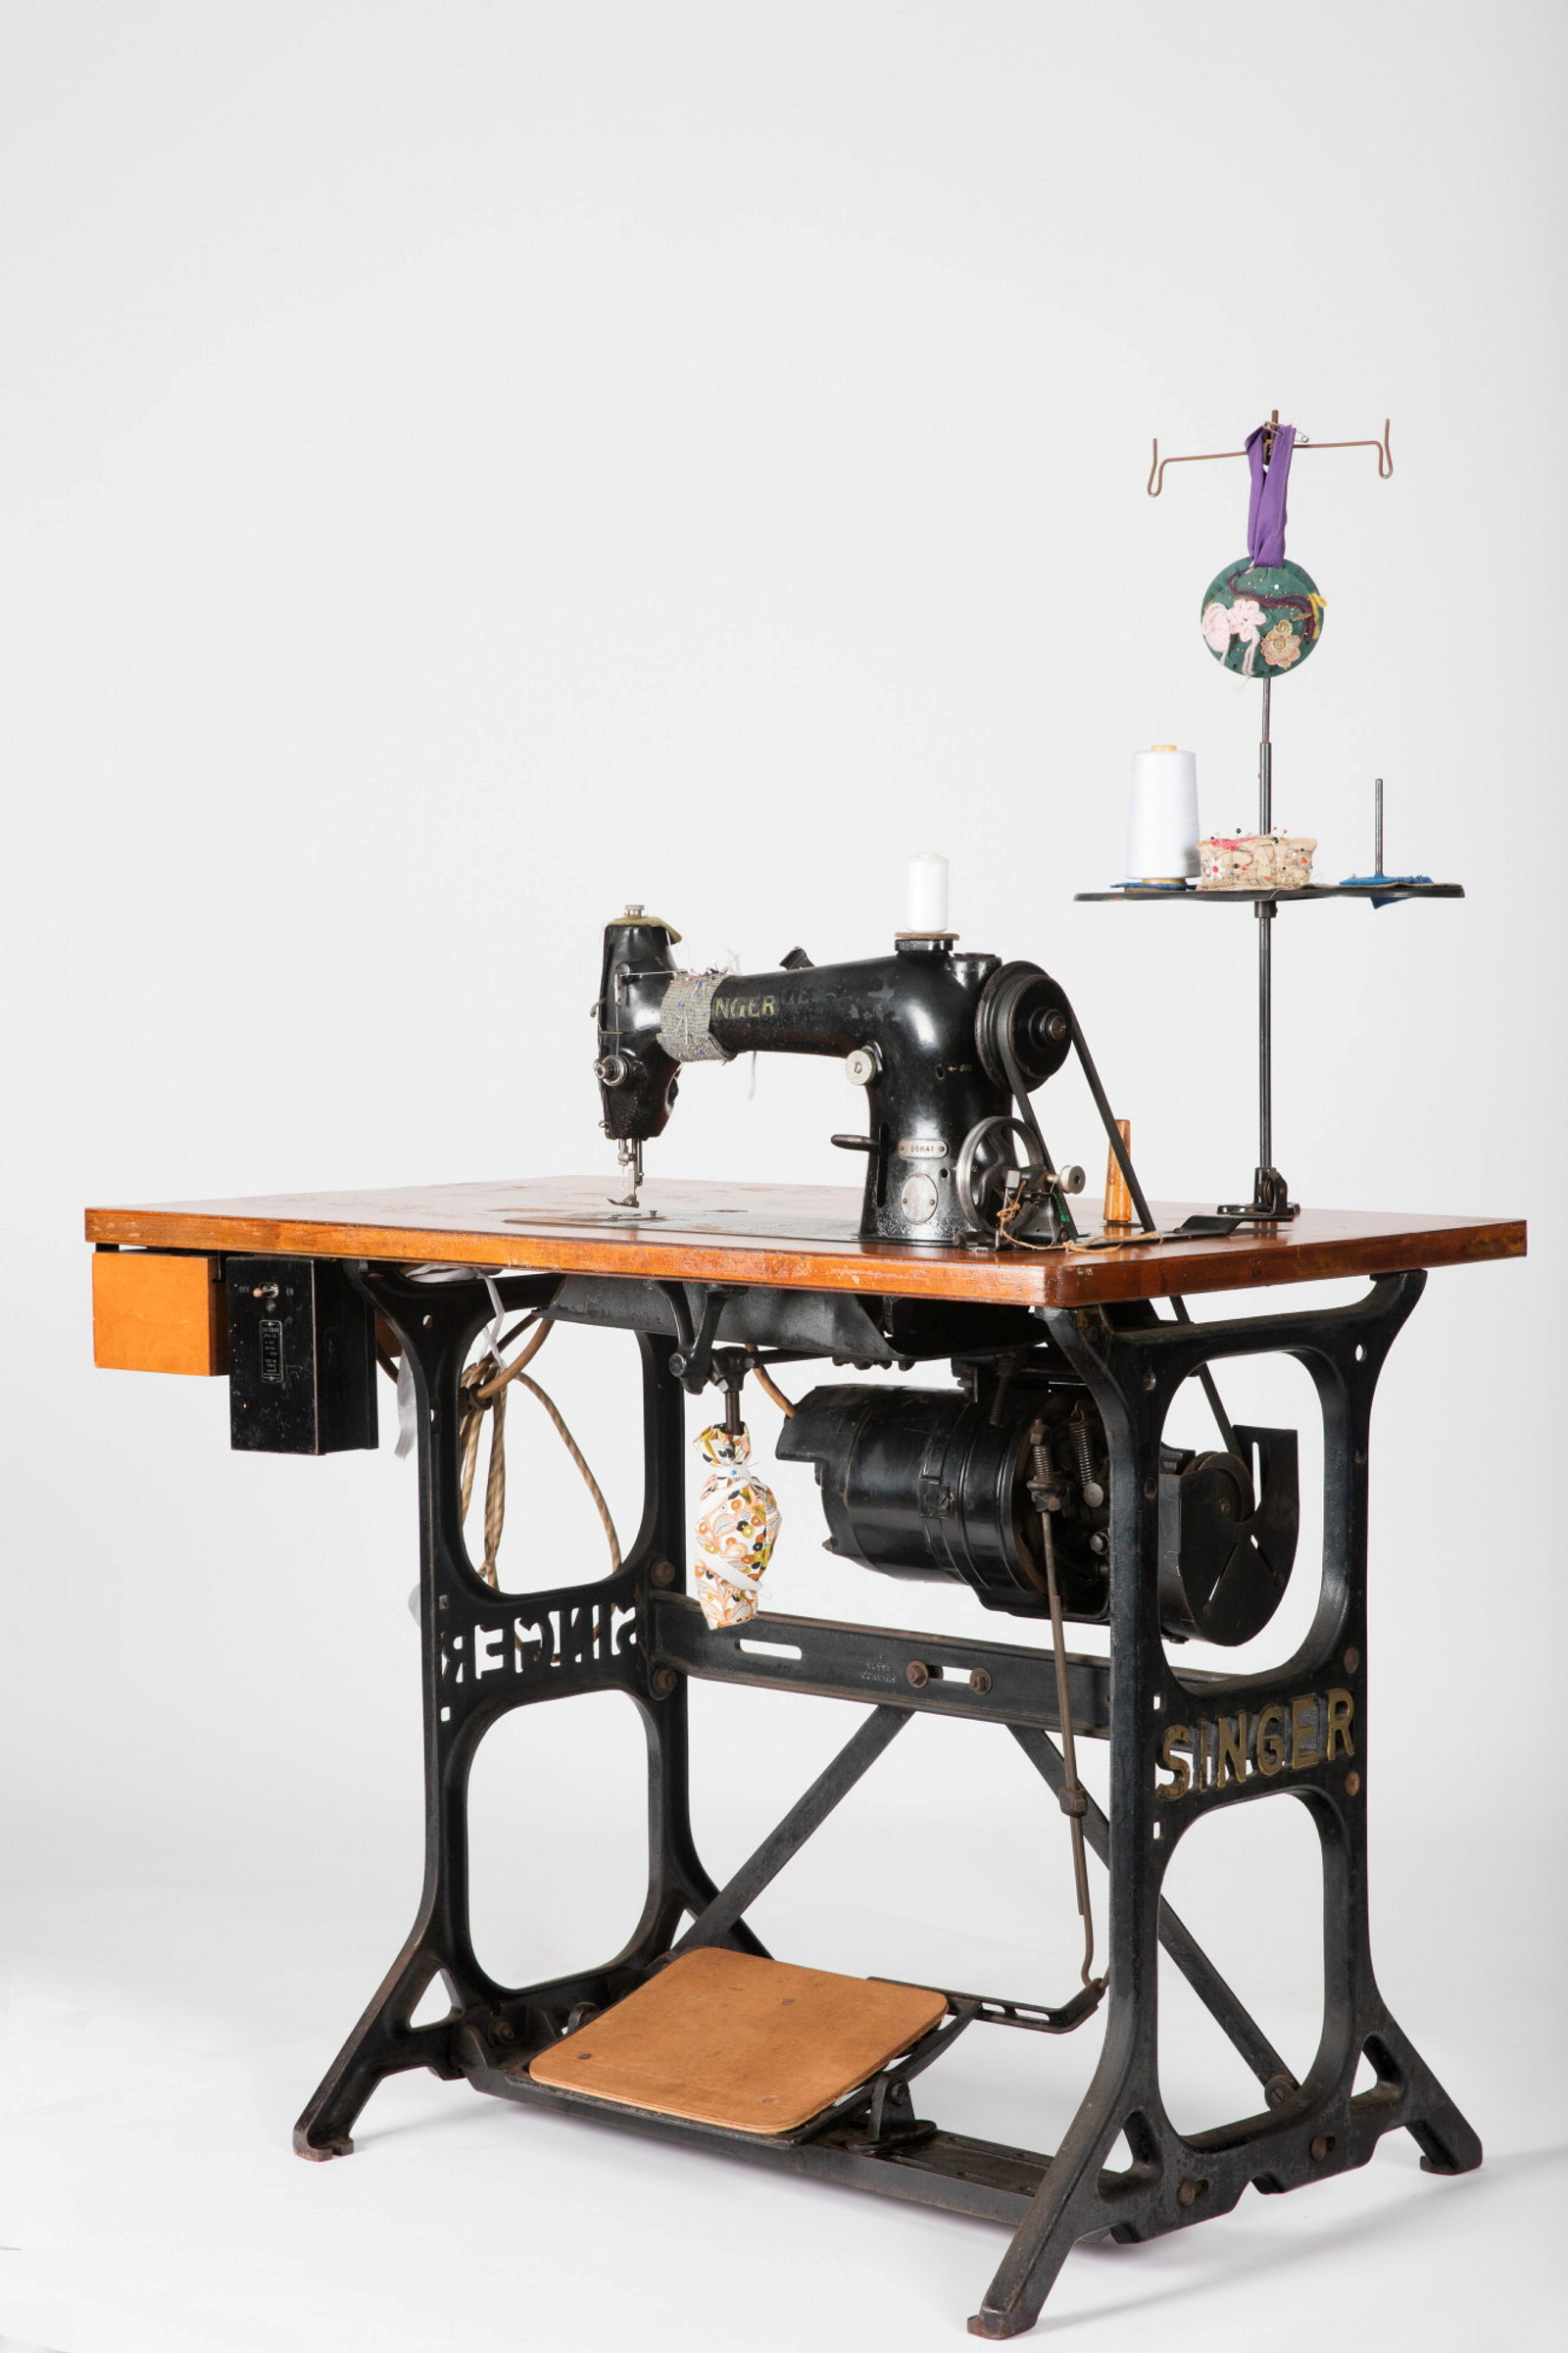 Metal framed sewing machine table with machine embedded.